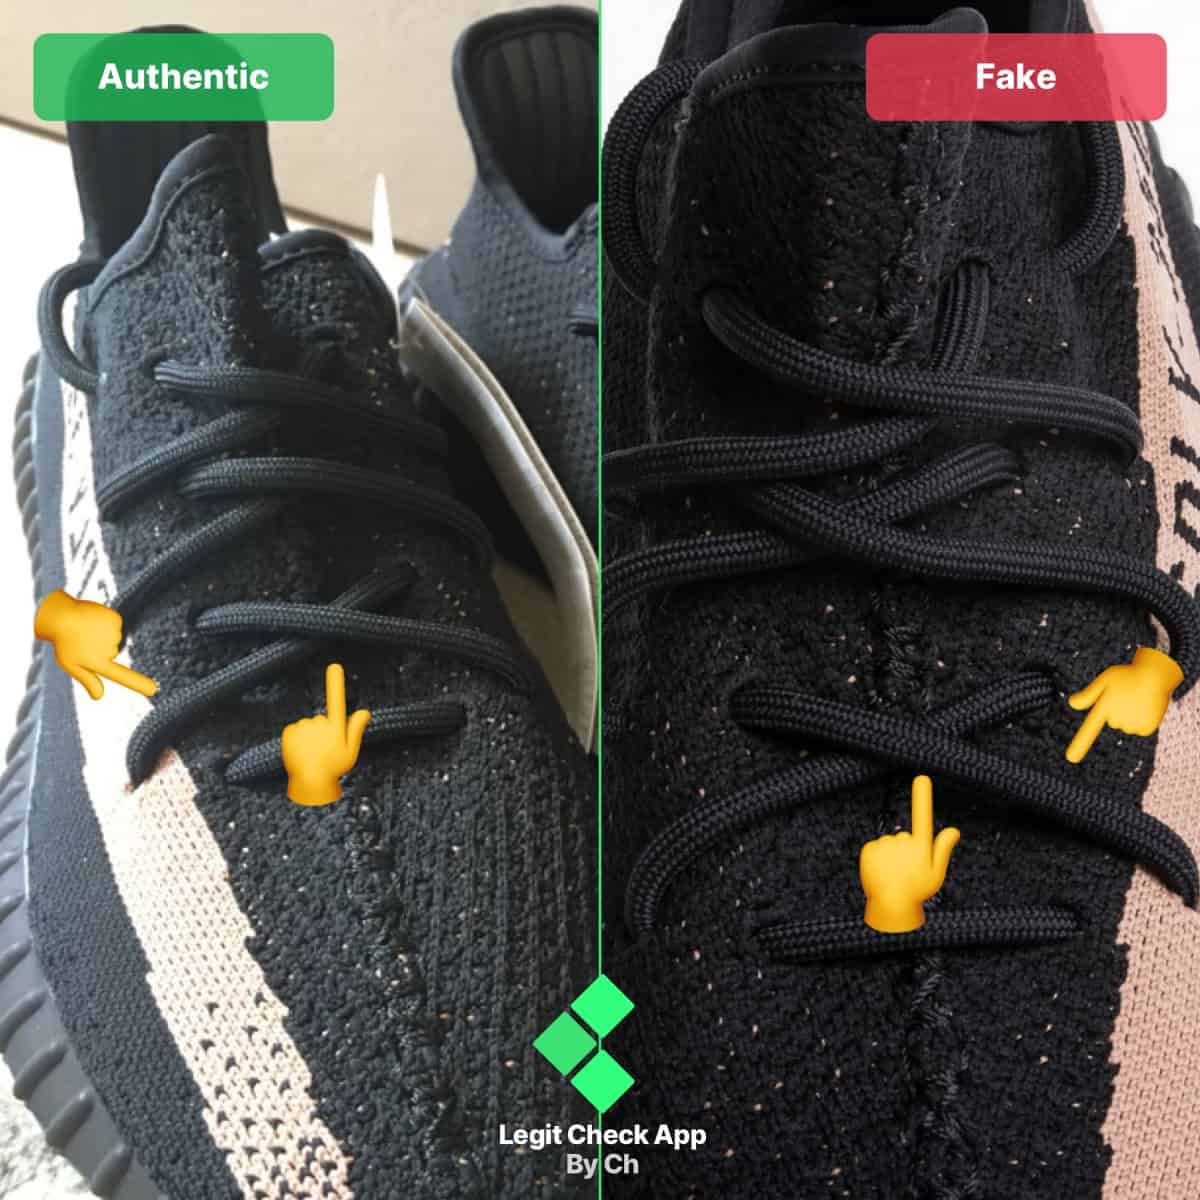 Fake Vs Real Yeezy Red Stripe, Green 